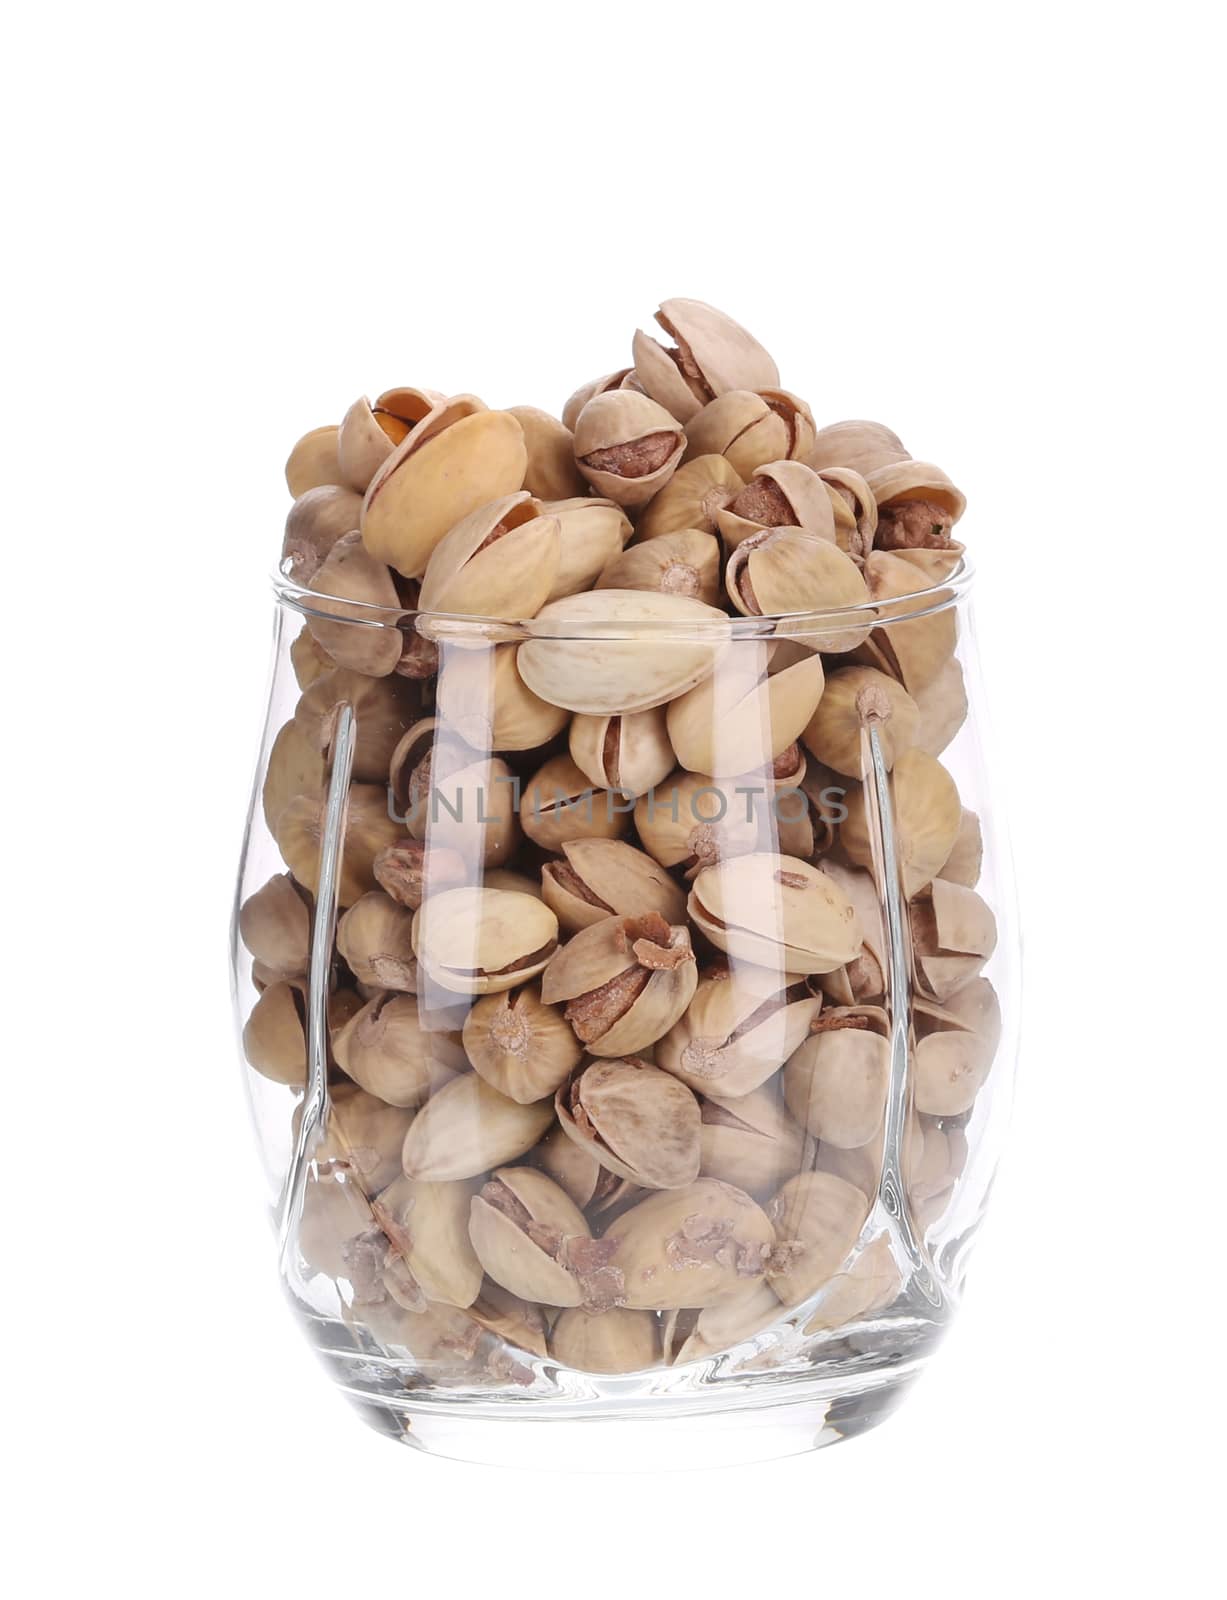 Full glass of pistachios. Isolated on a white background.